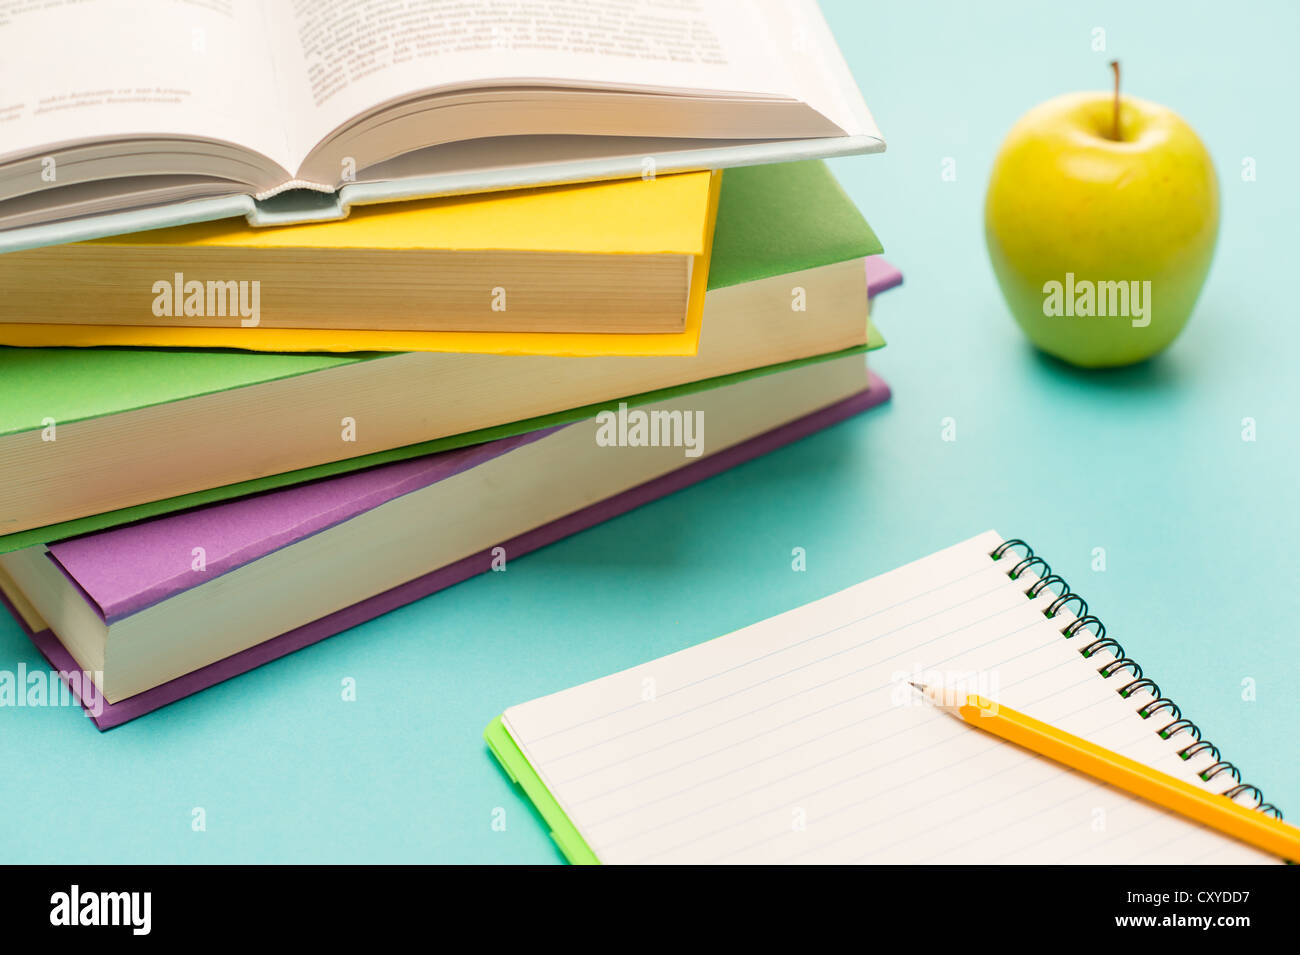 Pencil on notepad with school books and apple on student desk Stock Photo